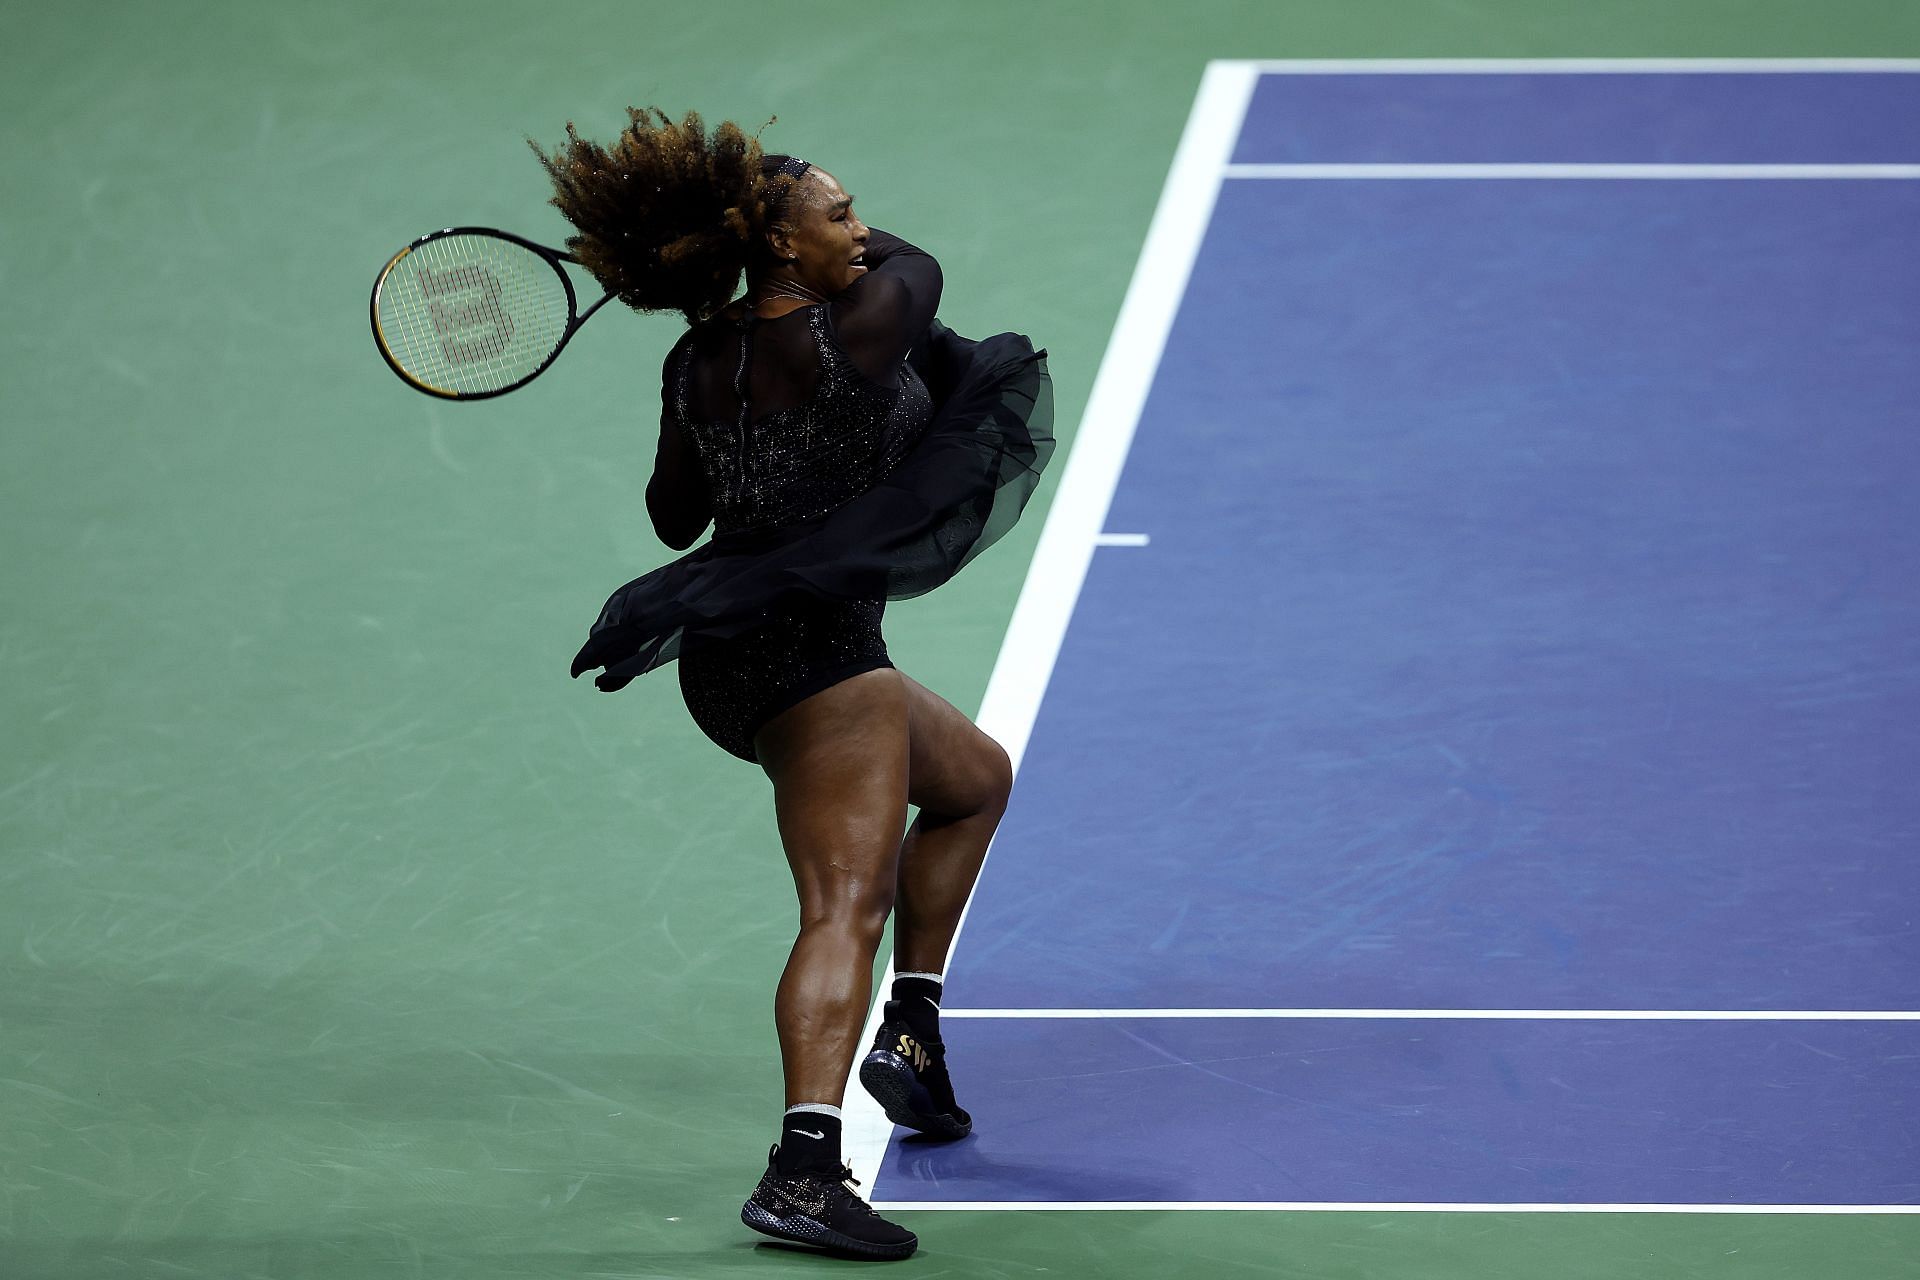 Williams in action. Photo by Julian Finney/Getty Images